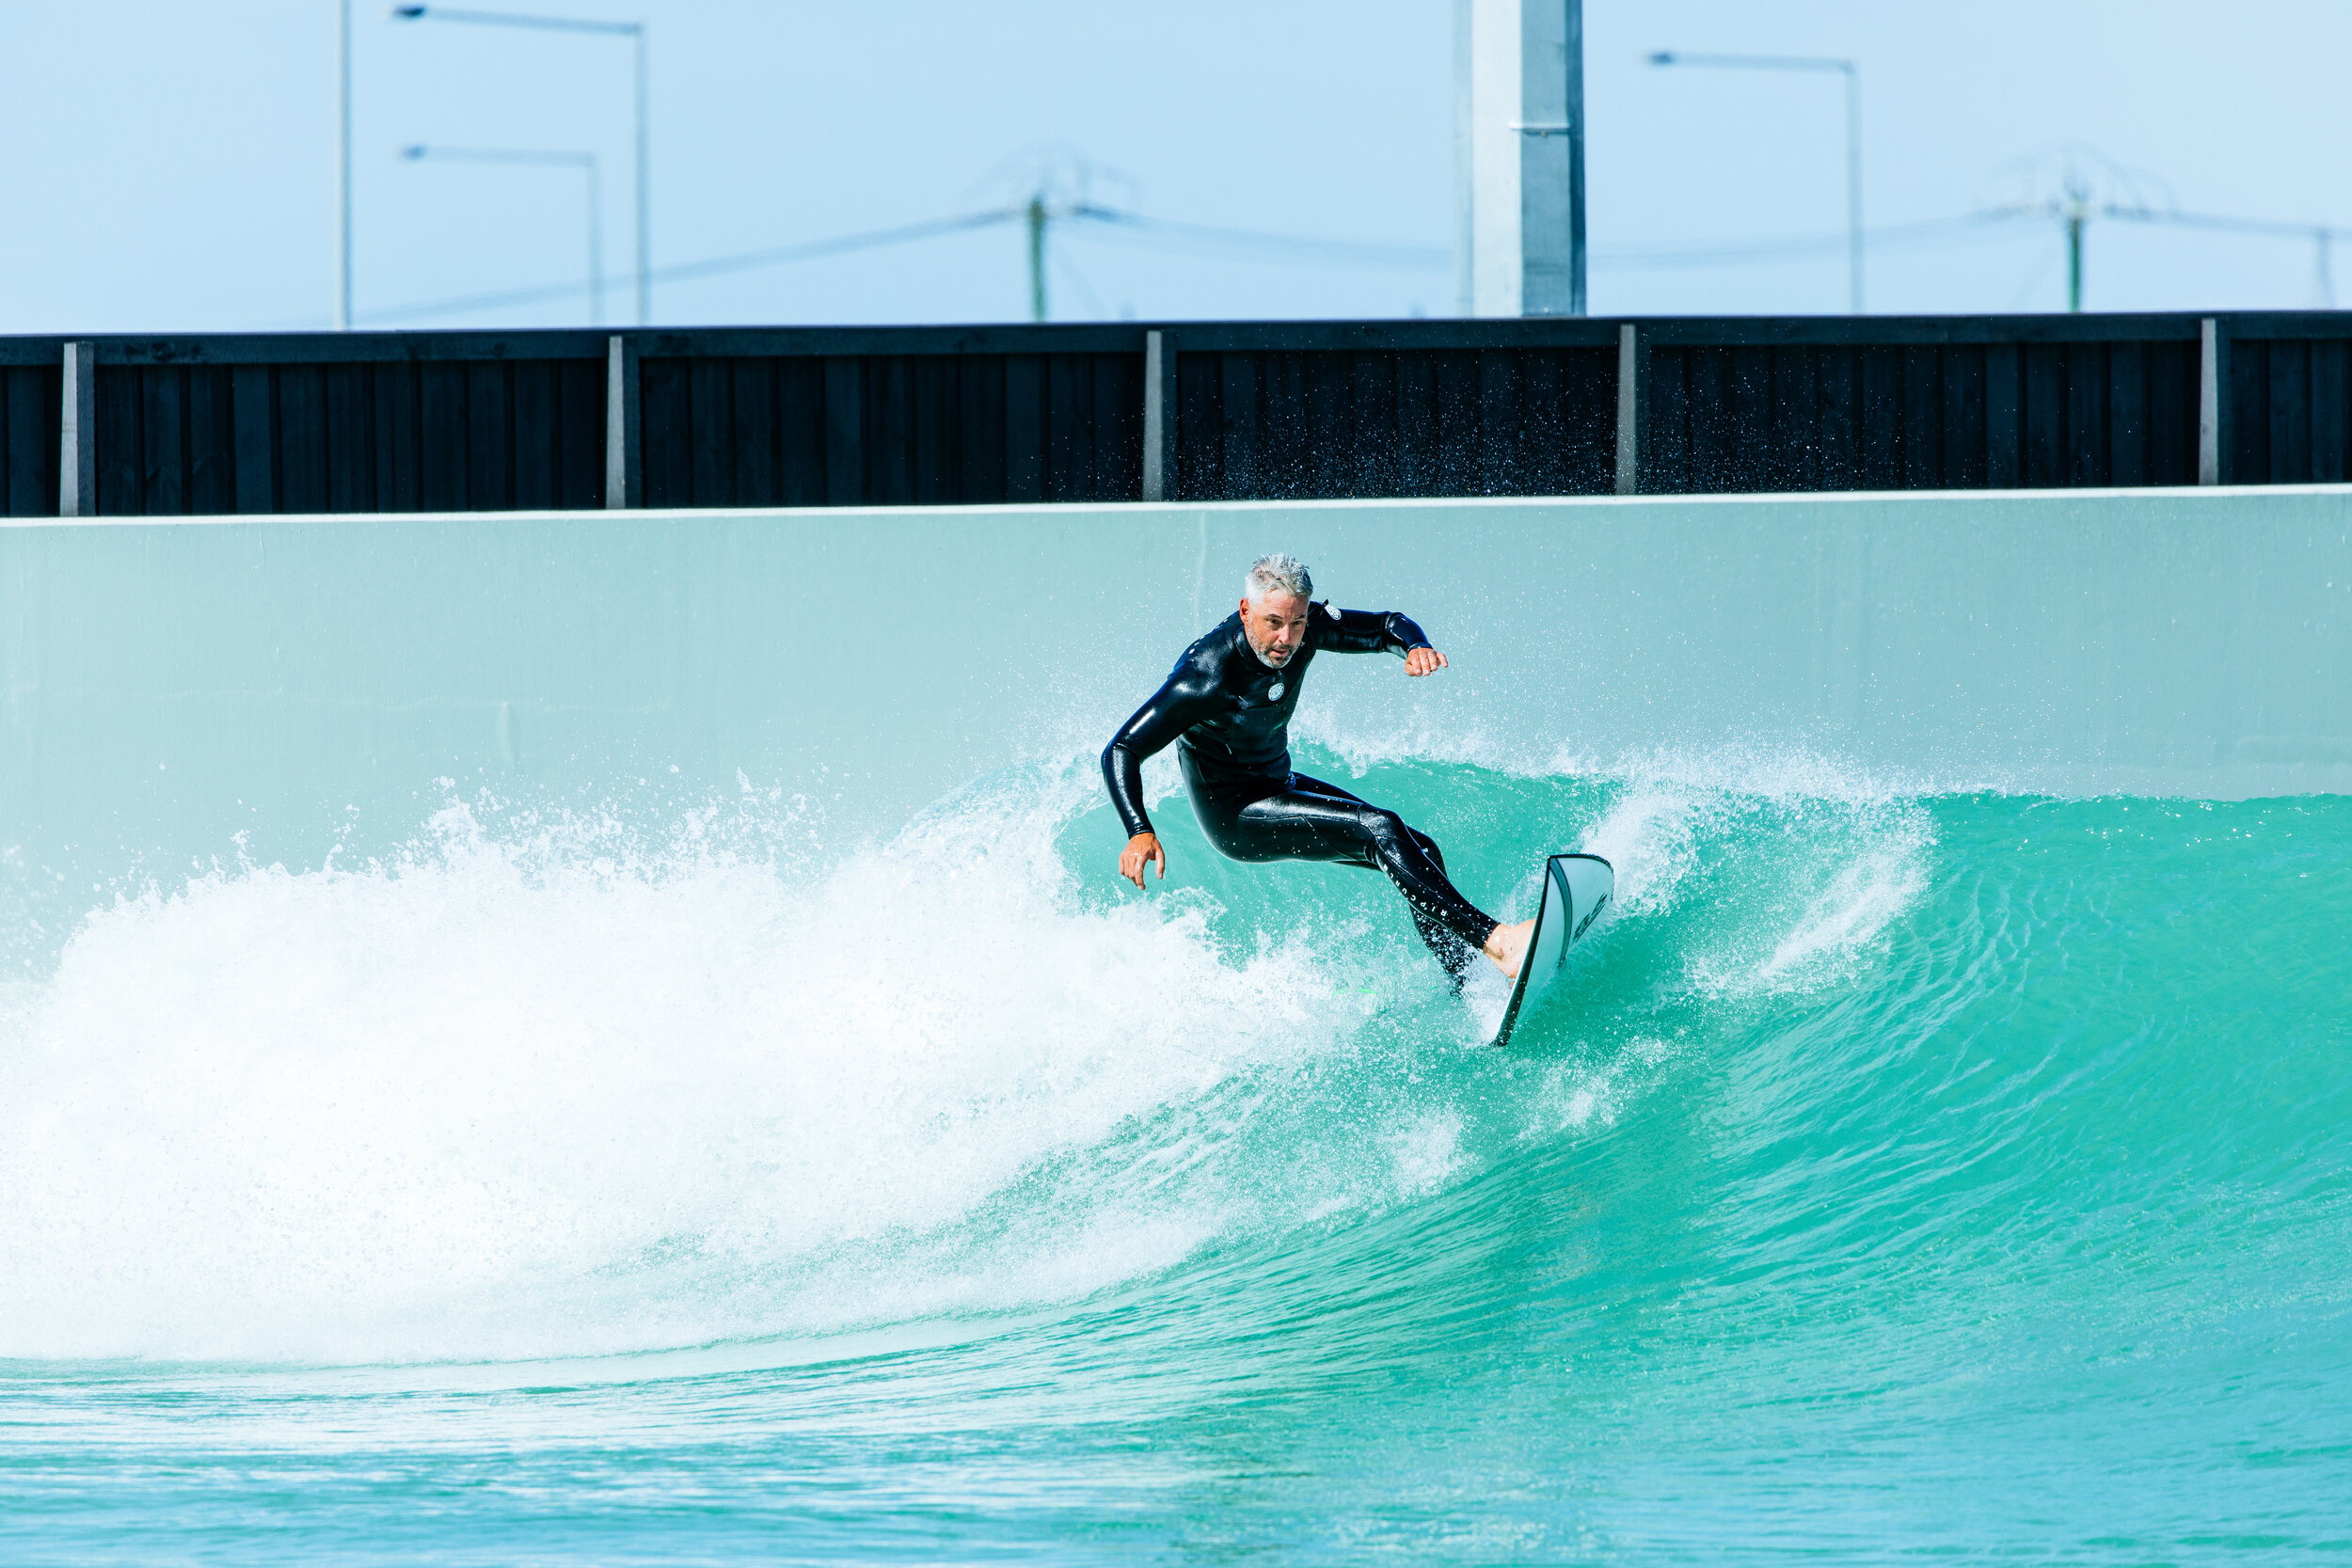   Andrew gets the honor of riding the very first wave at UrbnSurf  